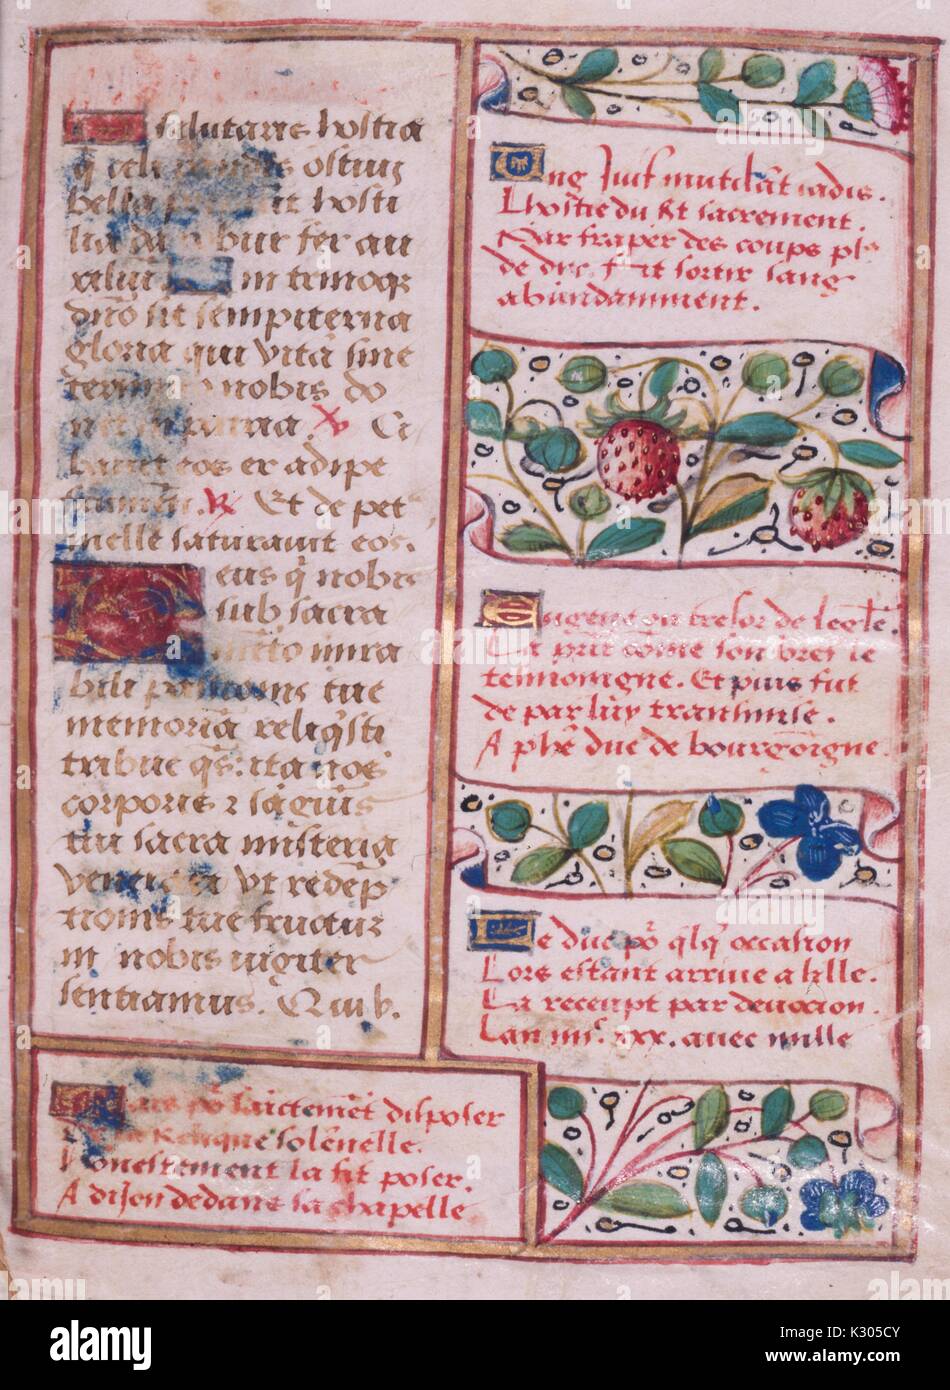 Illuminated manuscript page of French verse concerning a relic at Dijon, with decorative fruit and flowers, from the 'In comenza la meditatione in vulgare sopra la passione, ' a 15th century Latin book of hours, 2013. Stock Photo